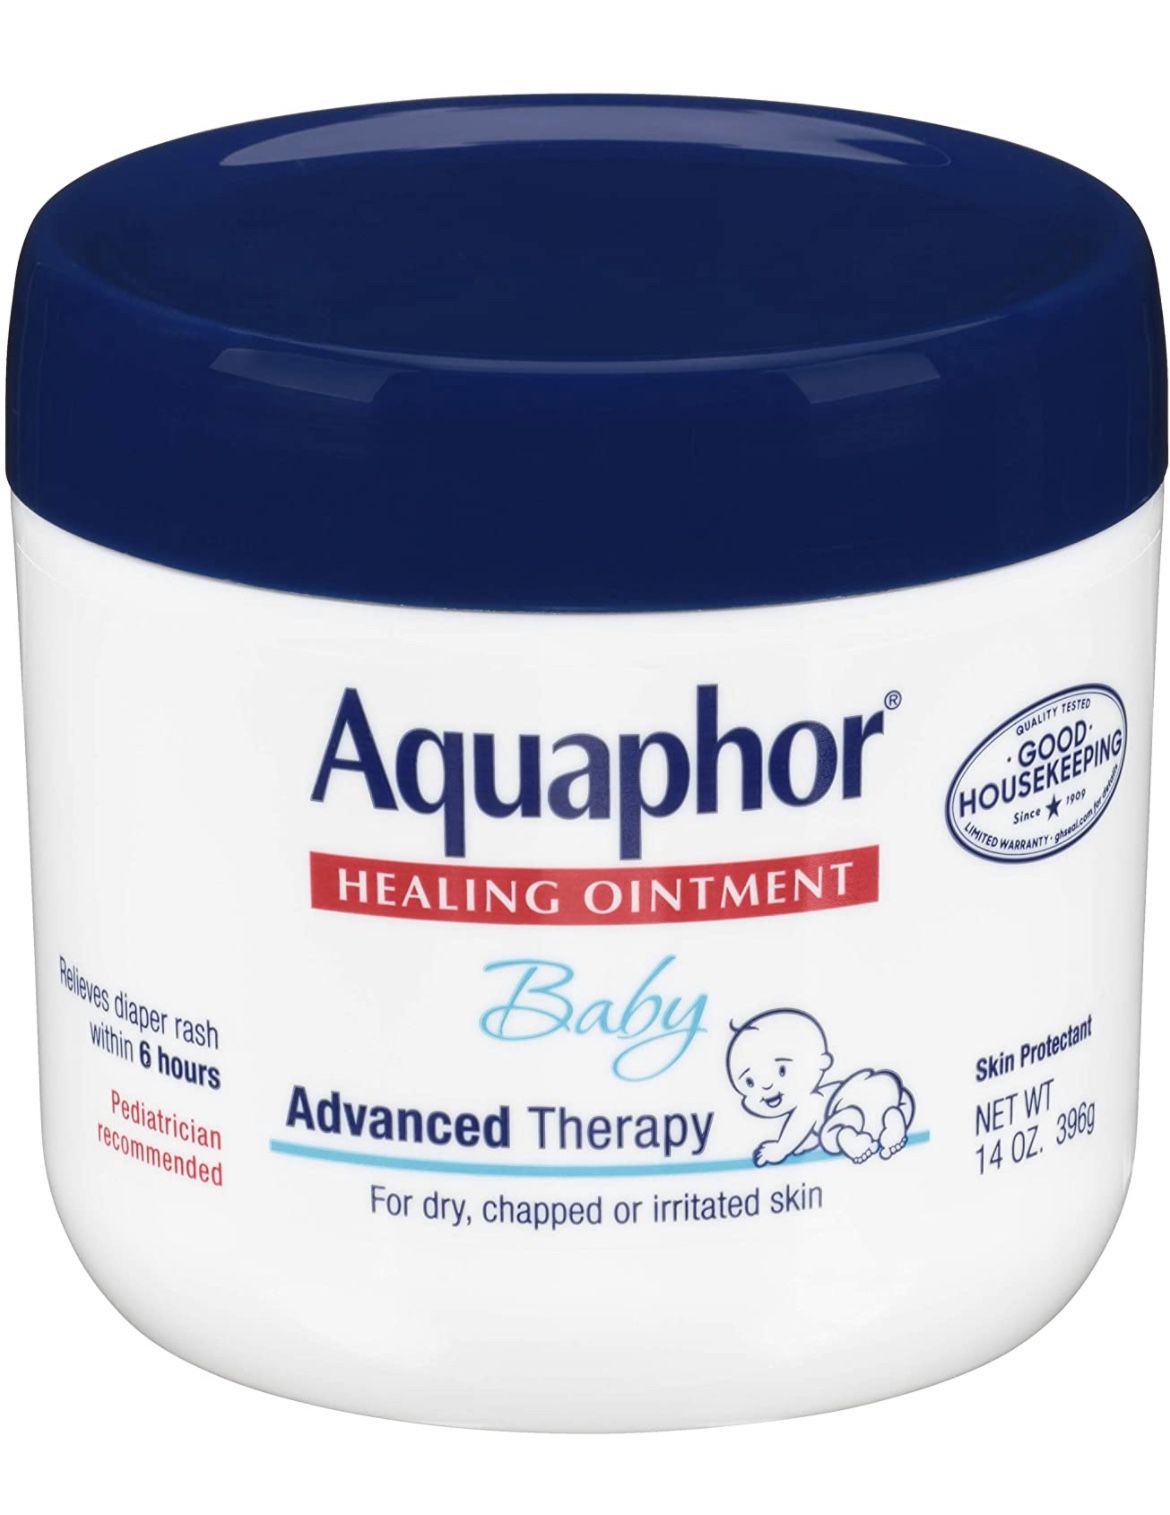 Aquaphor Baby Healing Ointment, Advance Therapy, 14 Oz